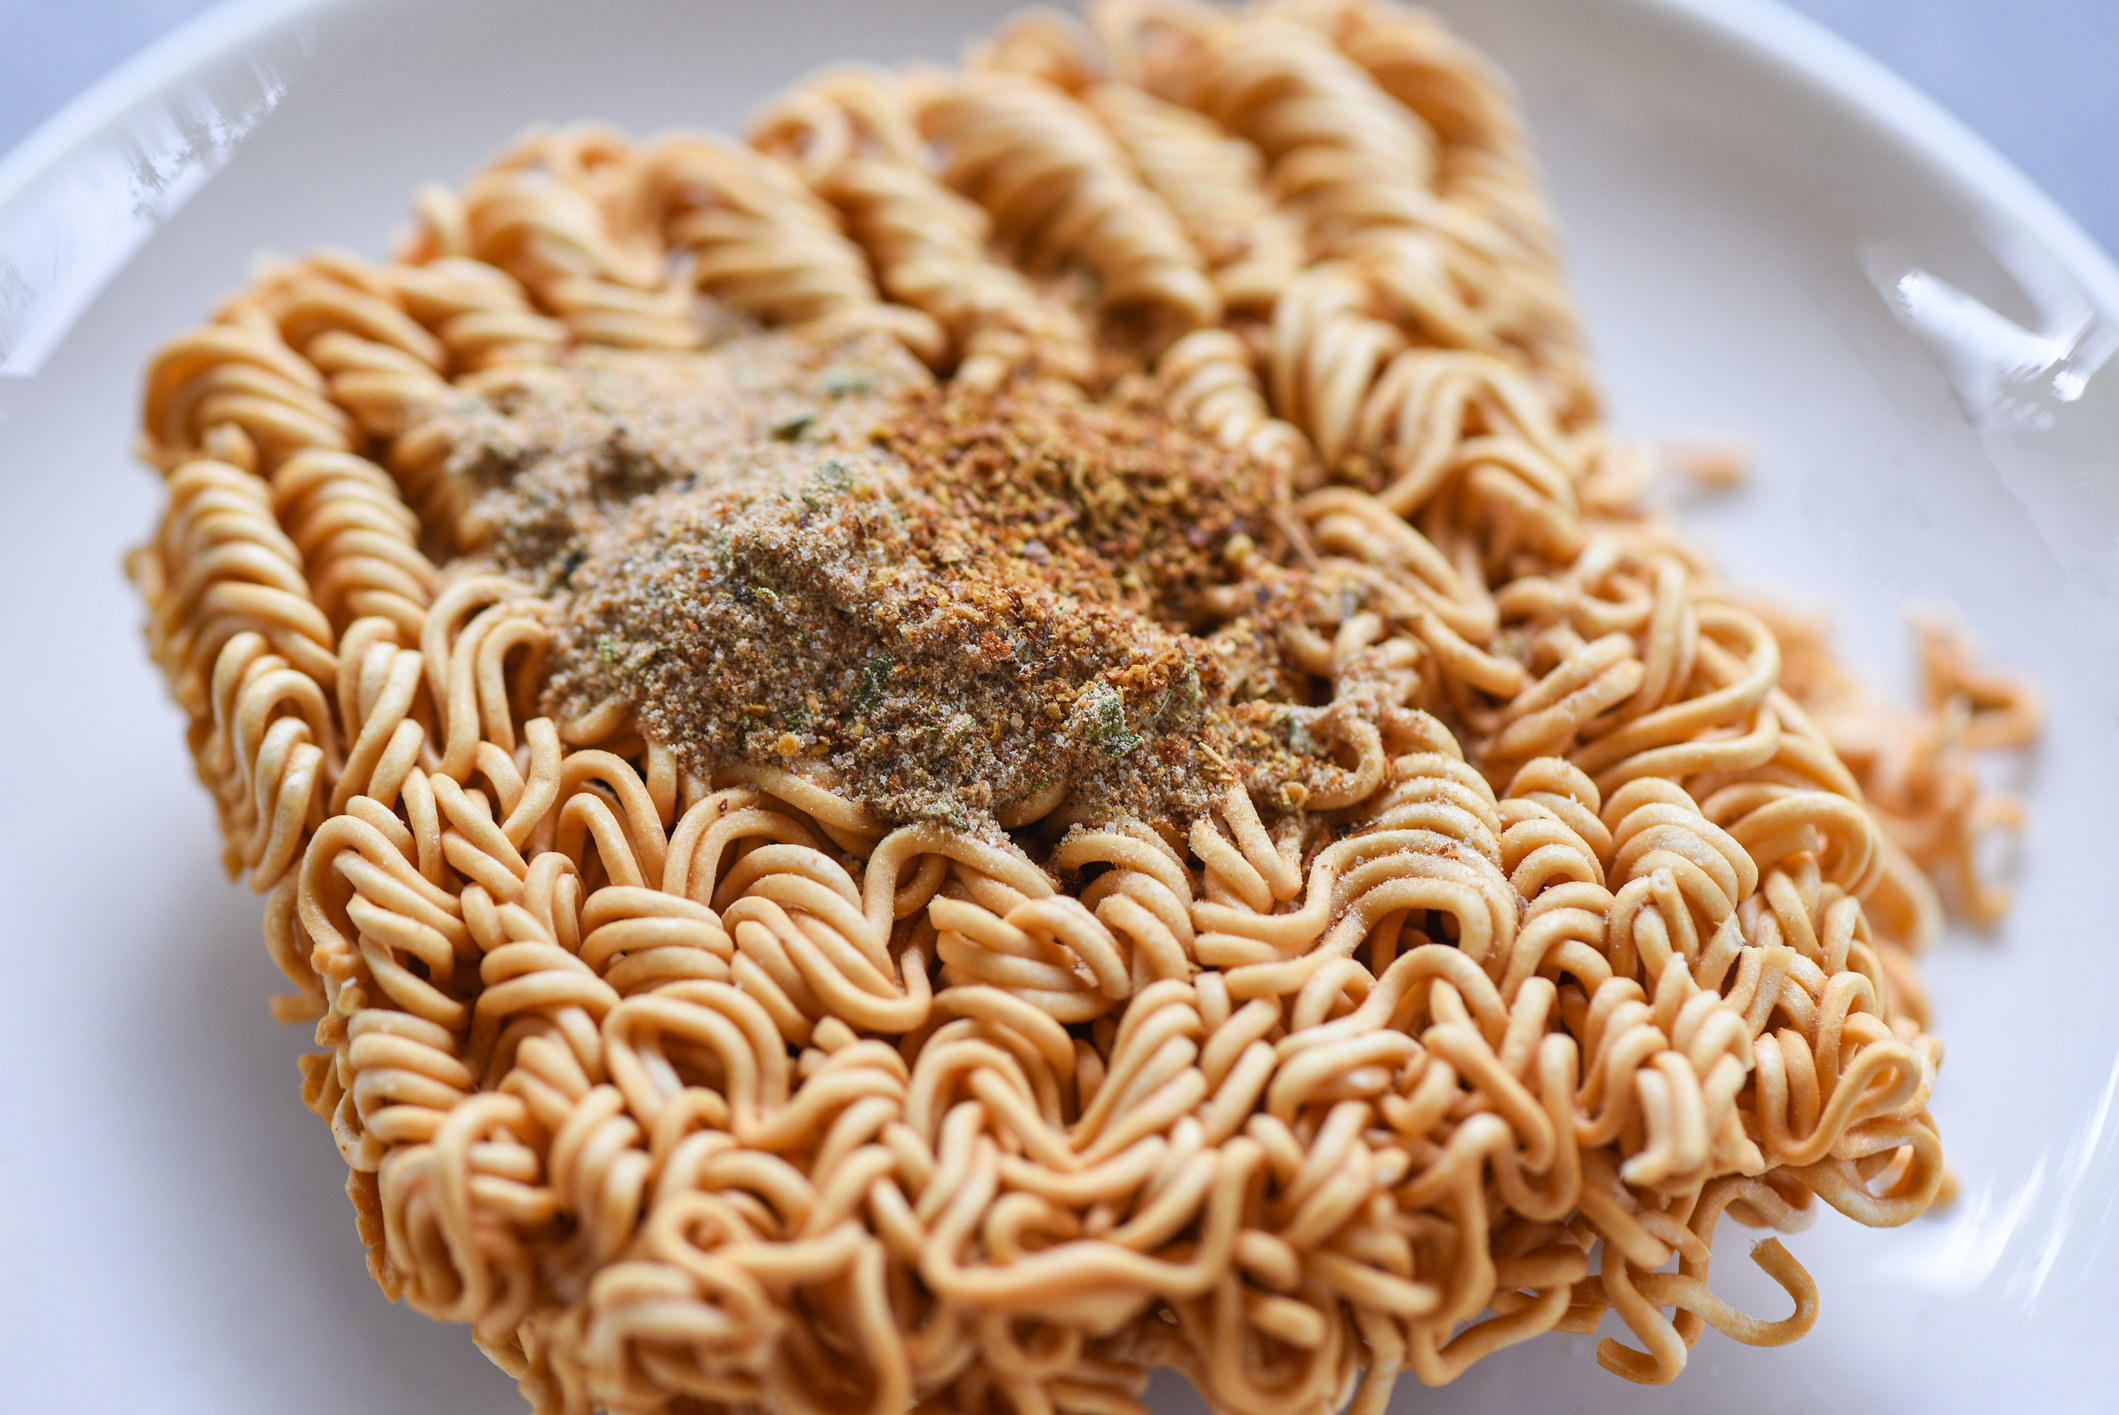 Ramen noodles topped with MSG seasoning.